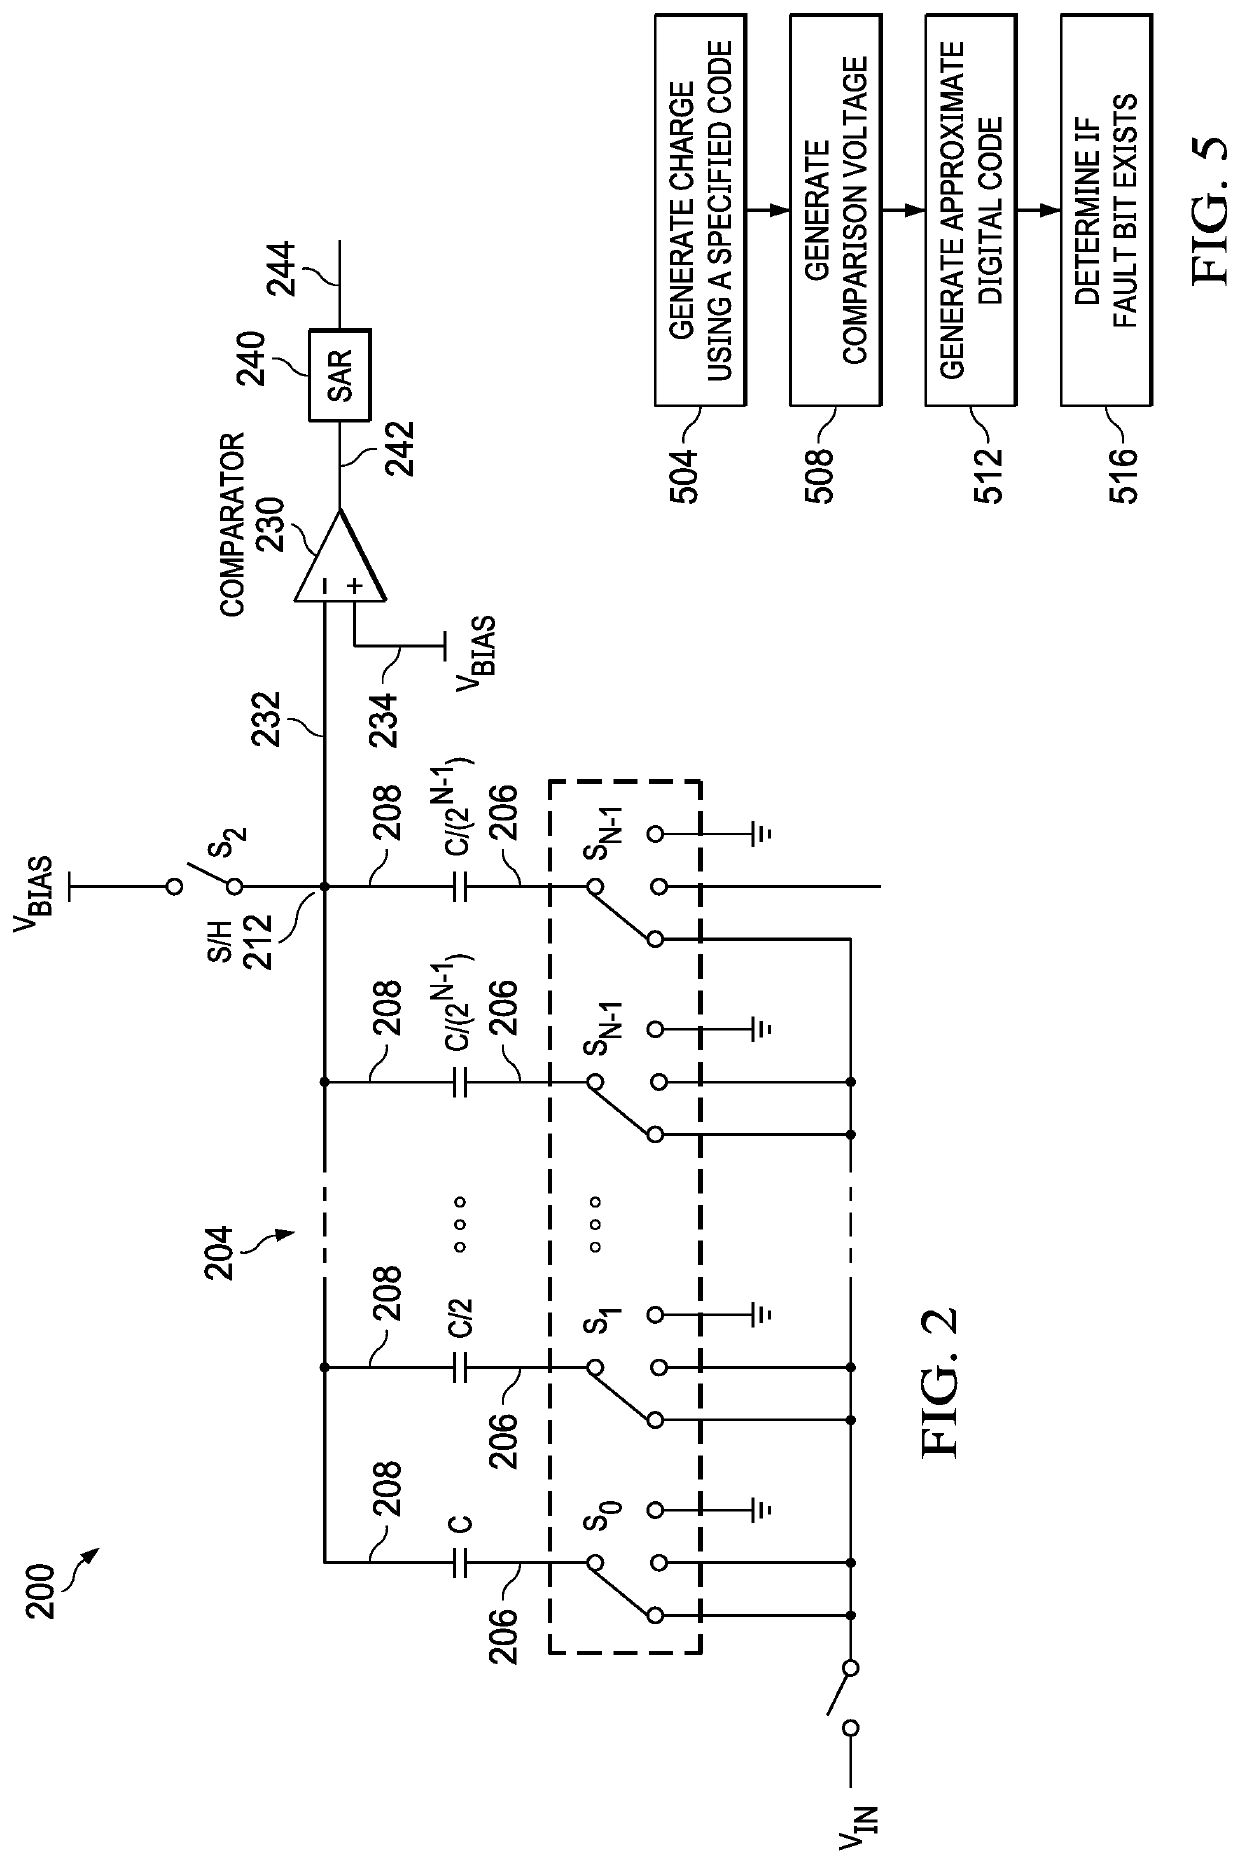 Systems and methods for testing analog to digital (A/D) converter with built-in diagnostic circuit with user supplied variable input voltage